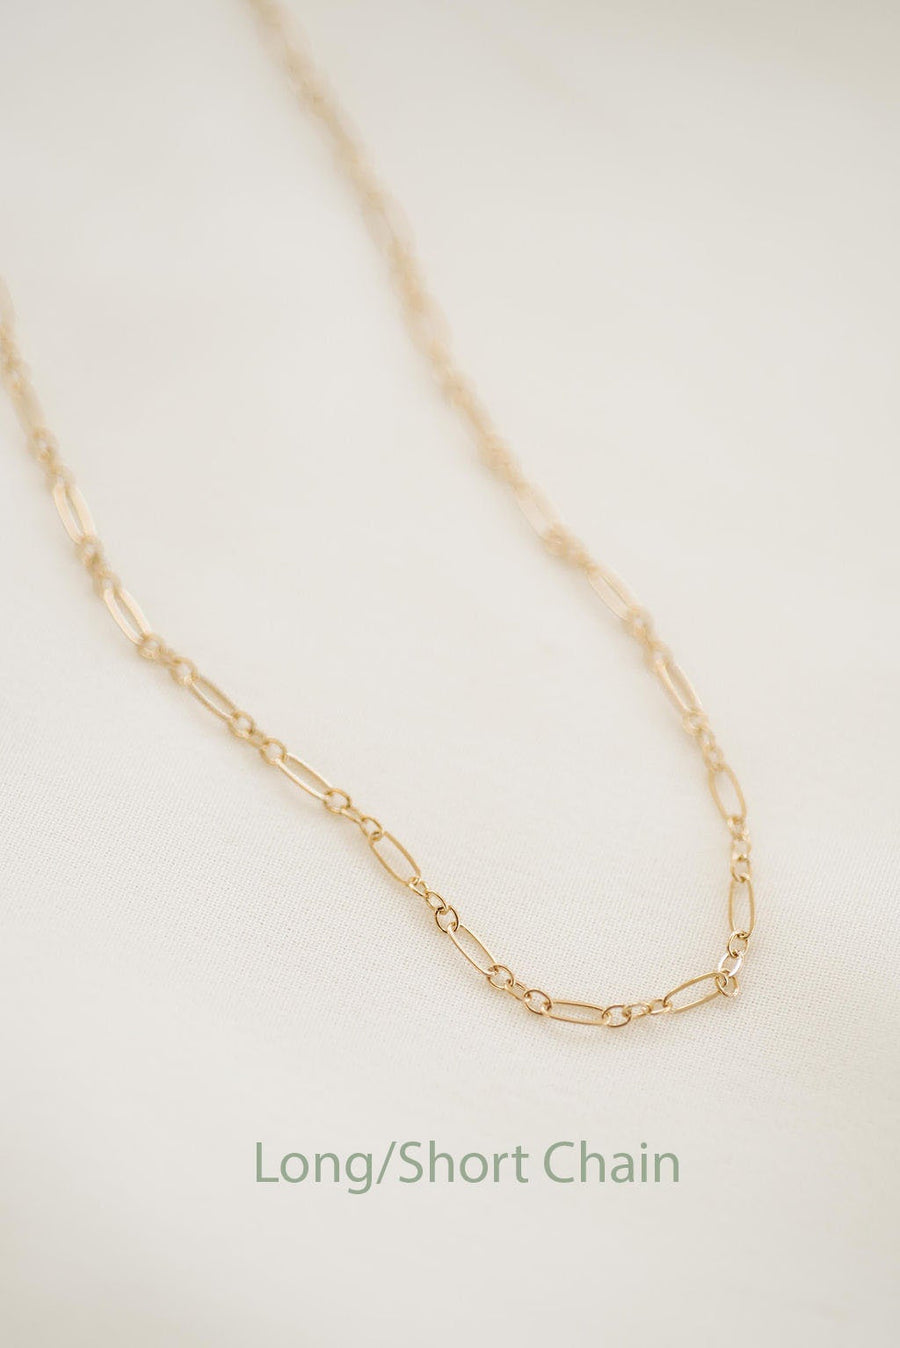 14K Gold-Filled Necklace Chain, Link Chain, Paperclip Chain, Figaro Chain, Rope Chain, Necklace, Choker, Layering Jewelry, Christmas Gift